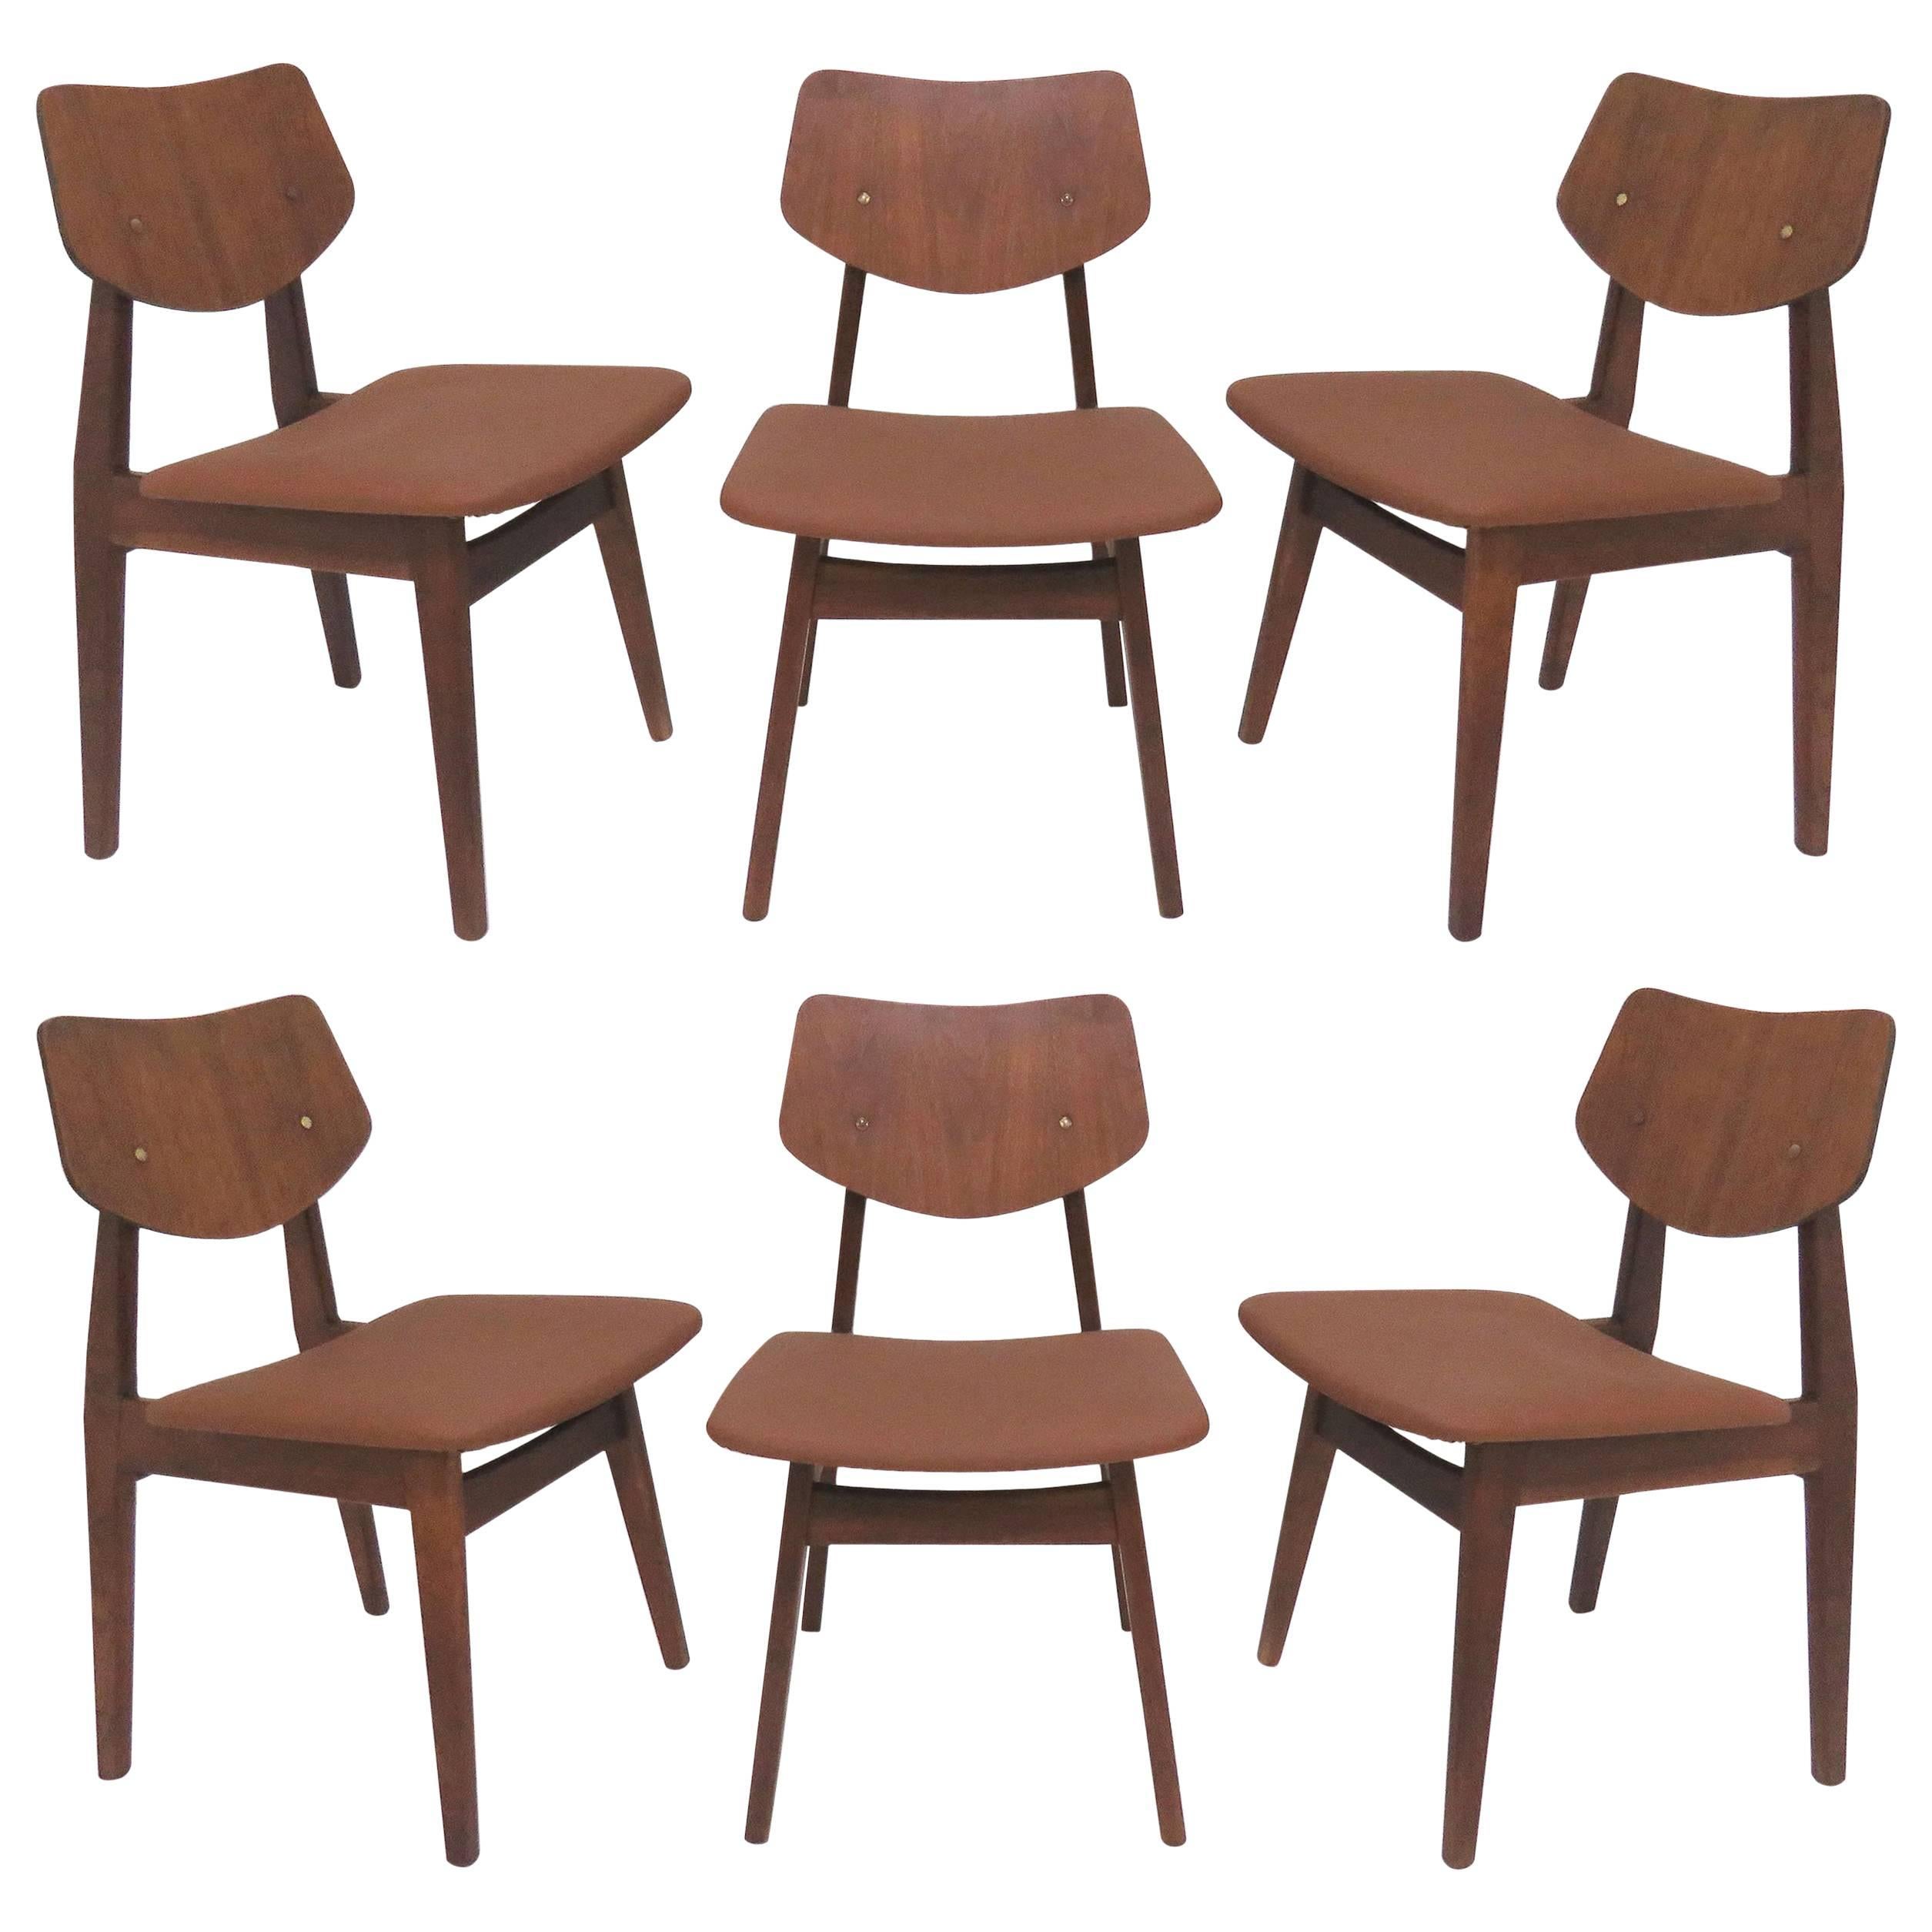 Set of Six Jens Risom Dining Chairs